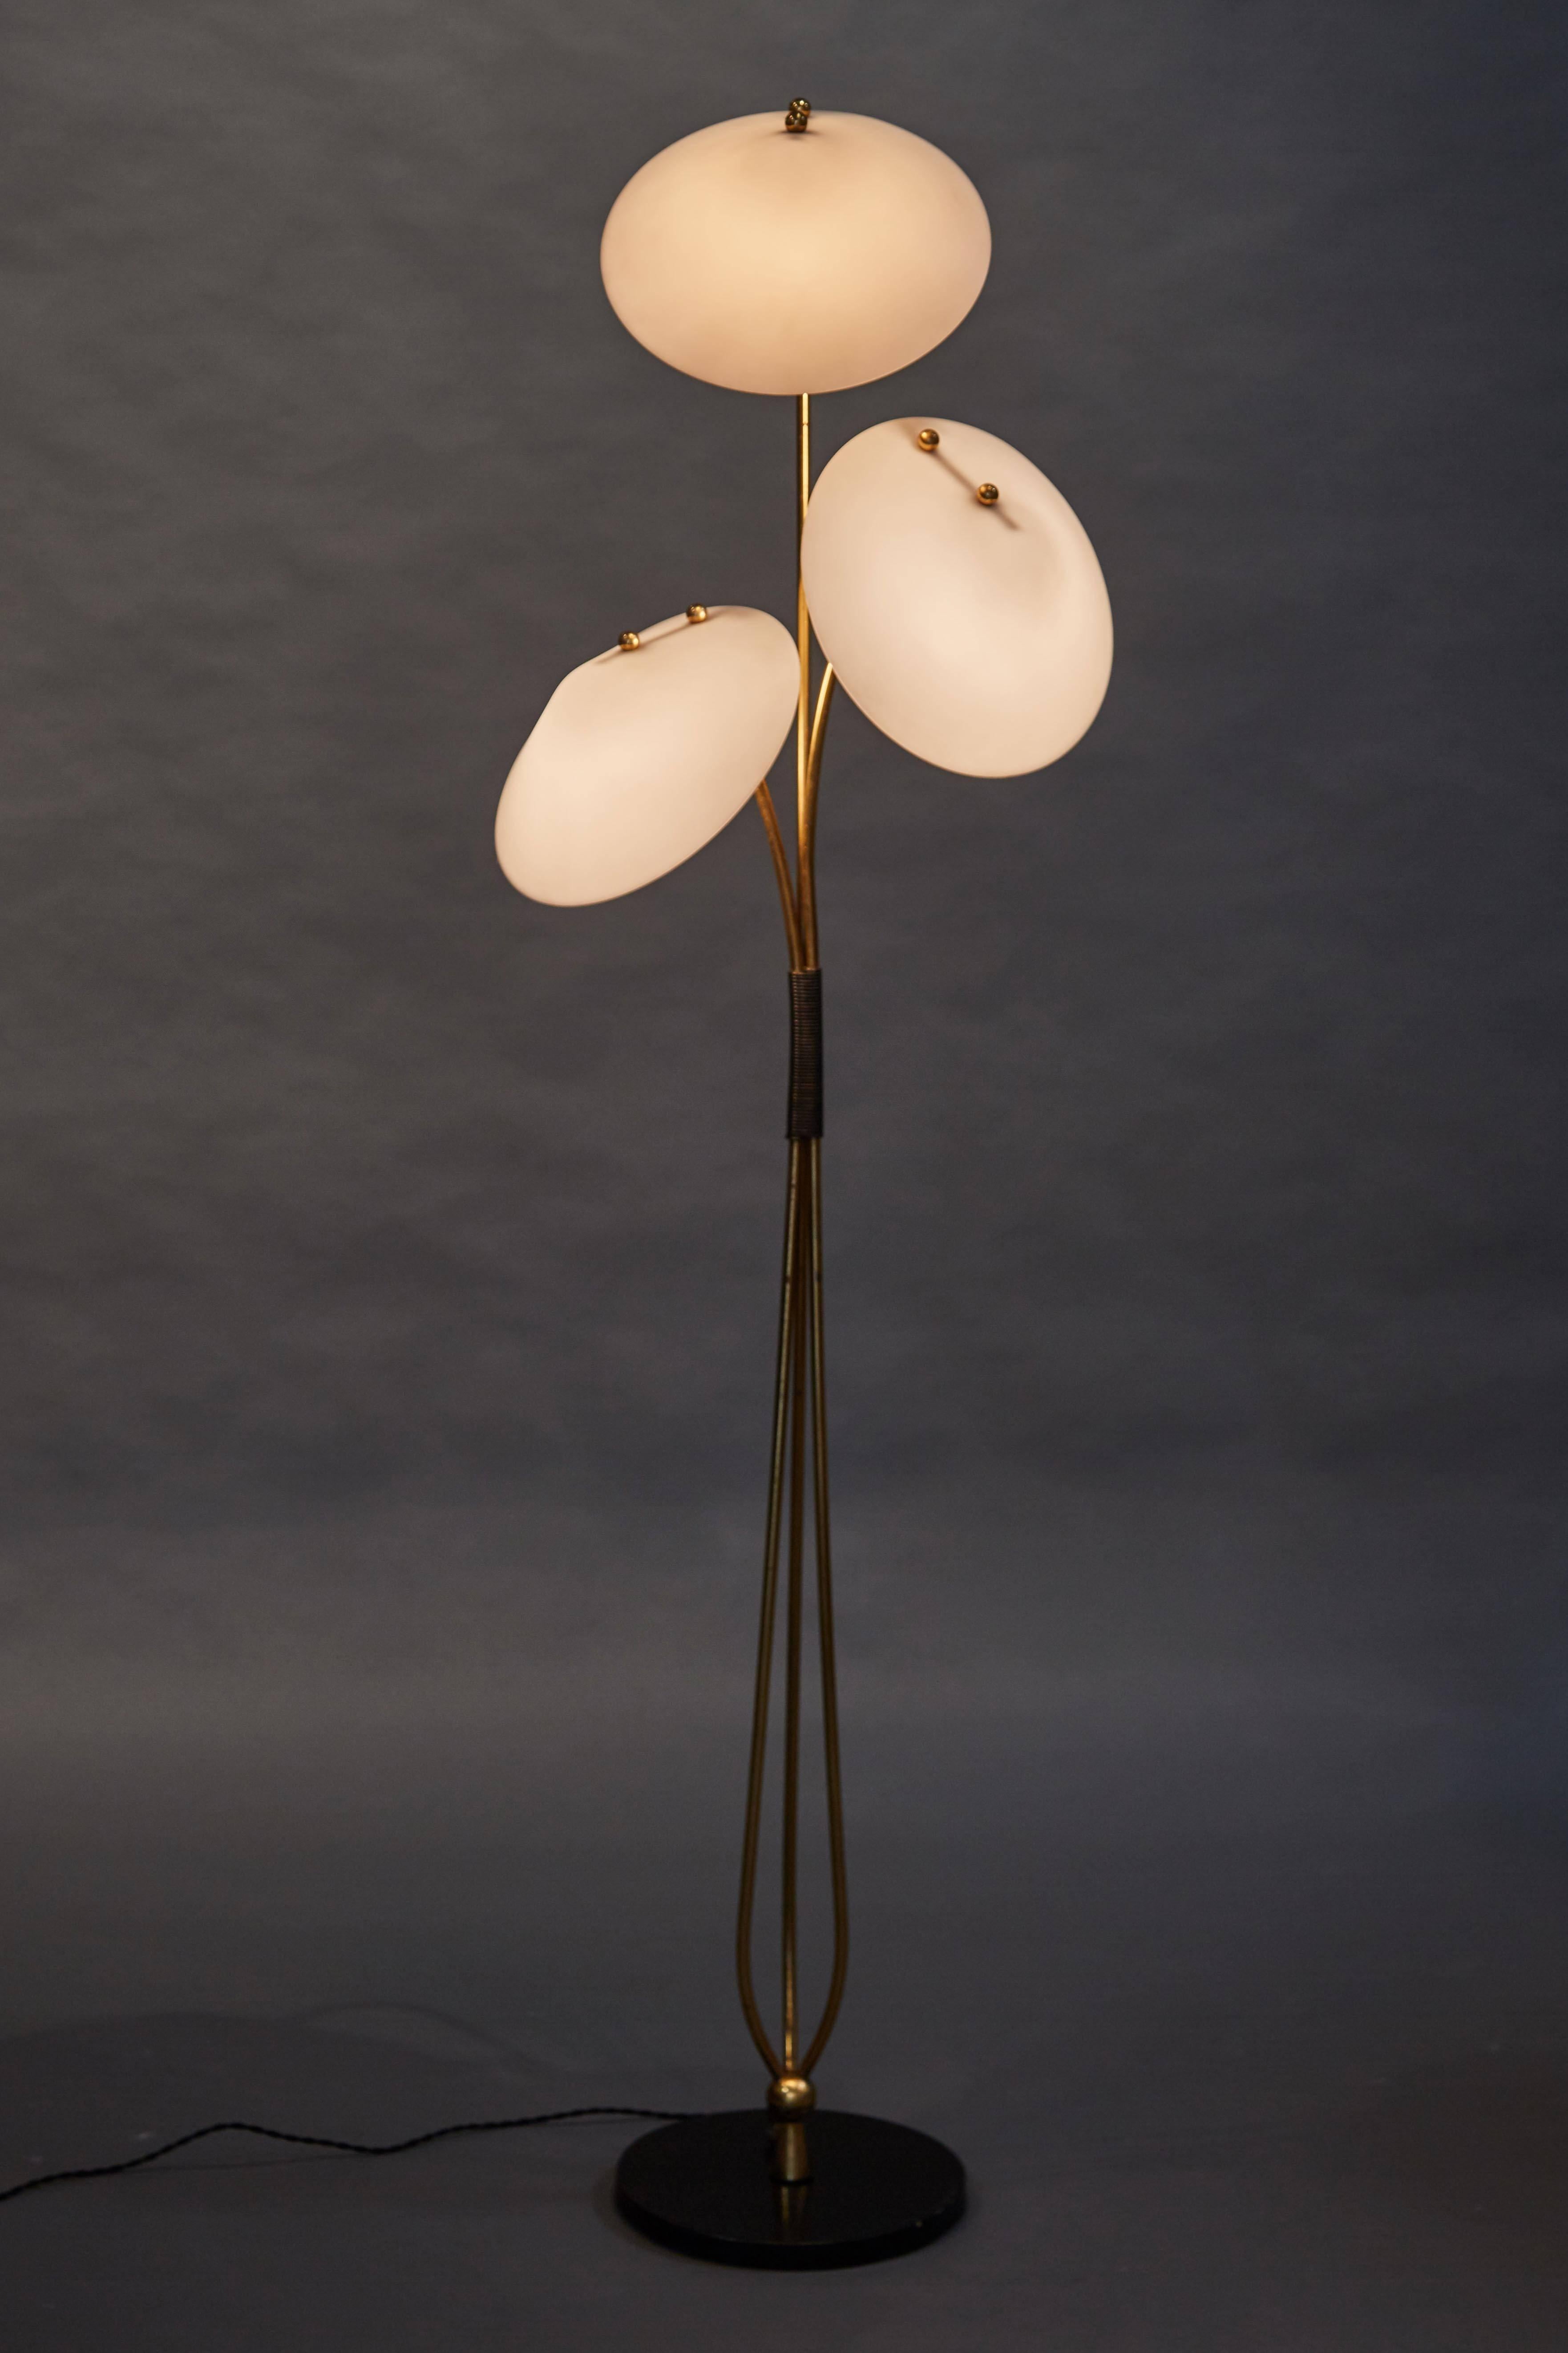 A unique and beautiful French floor lamp with three acrylic pyramidal shades above brass rods and an enameled metal base.